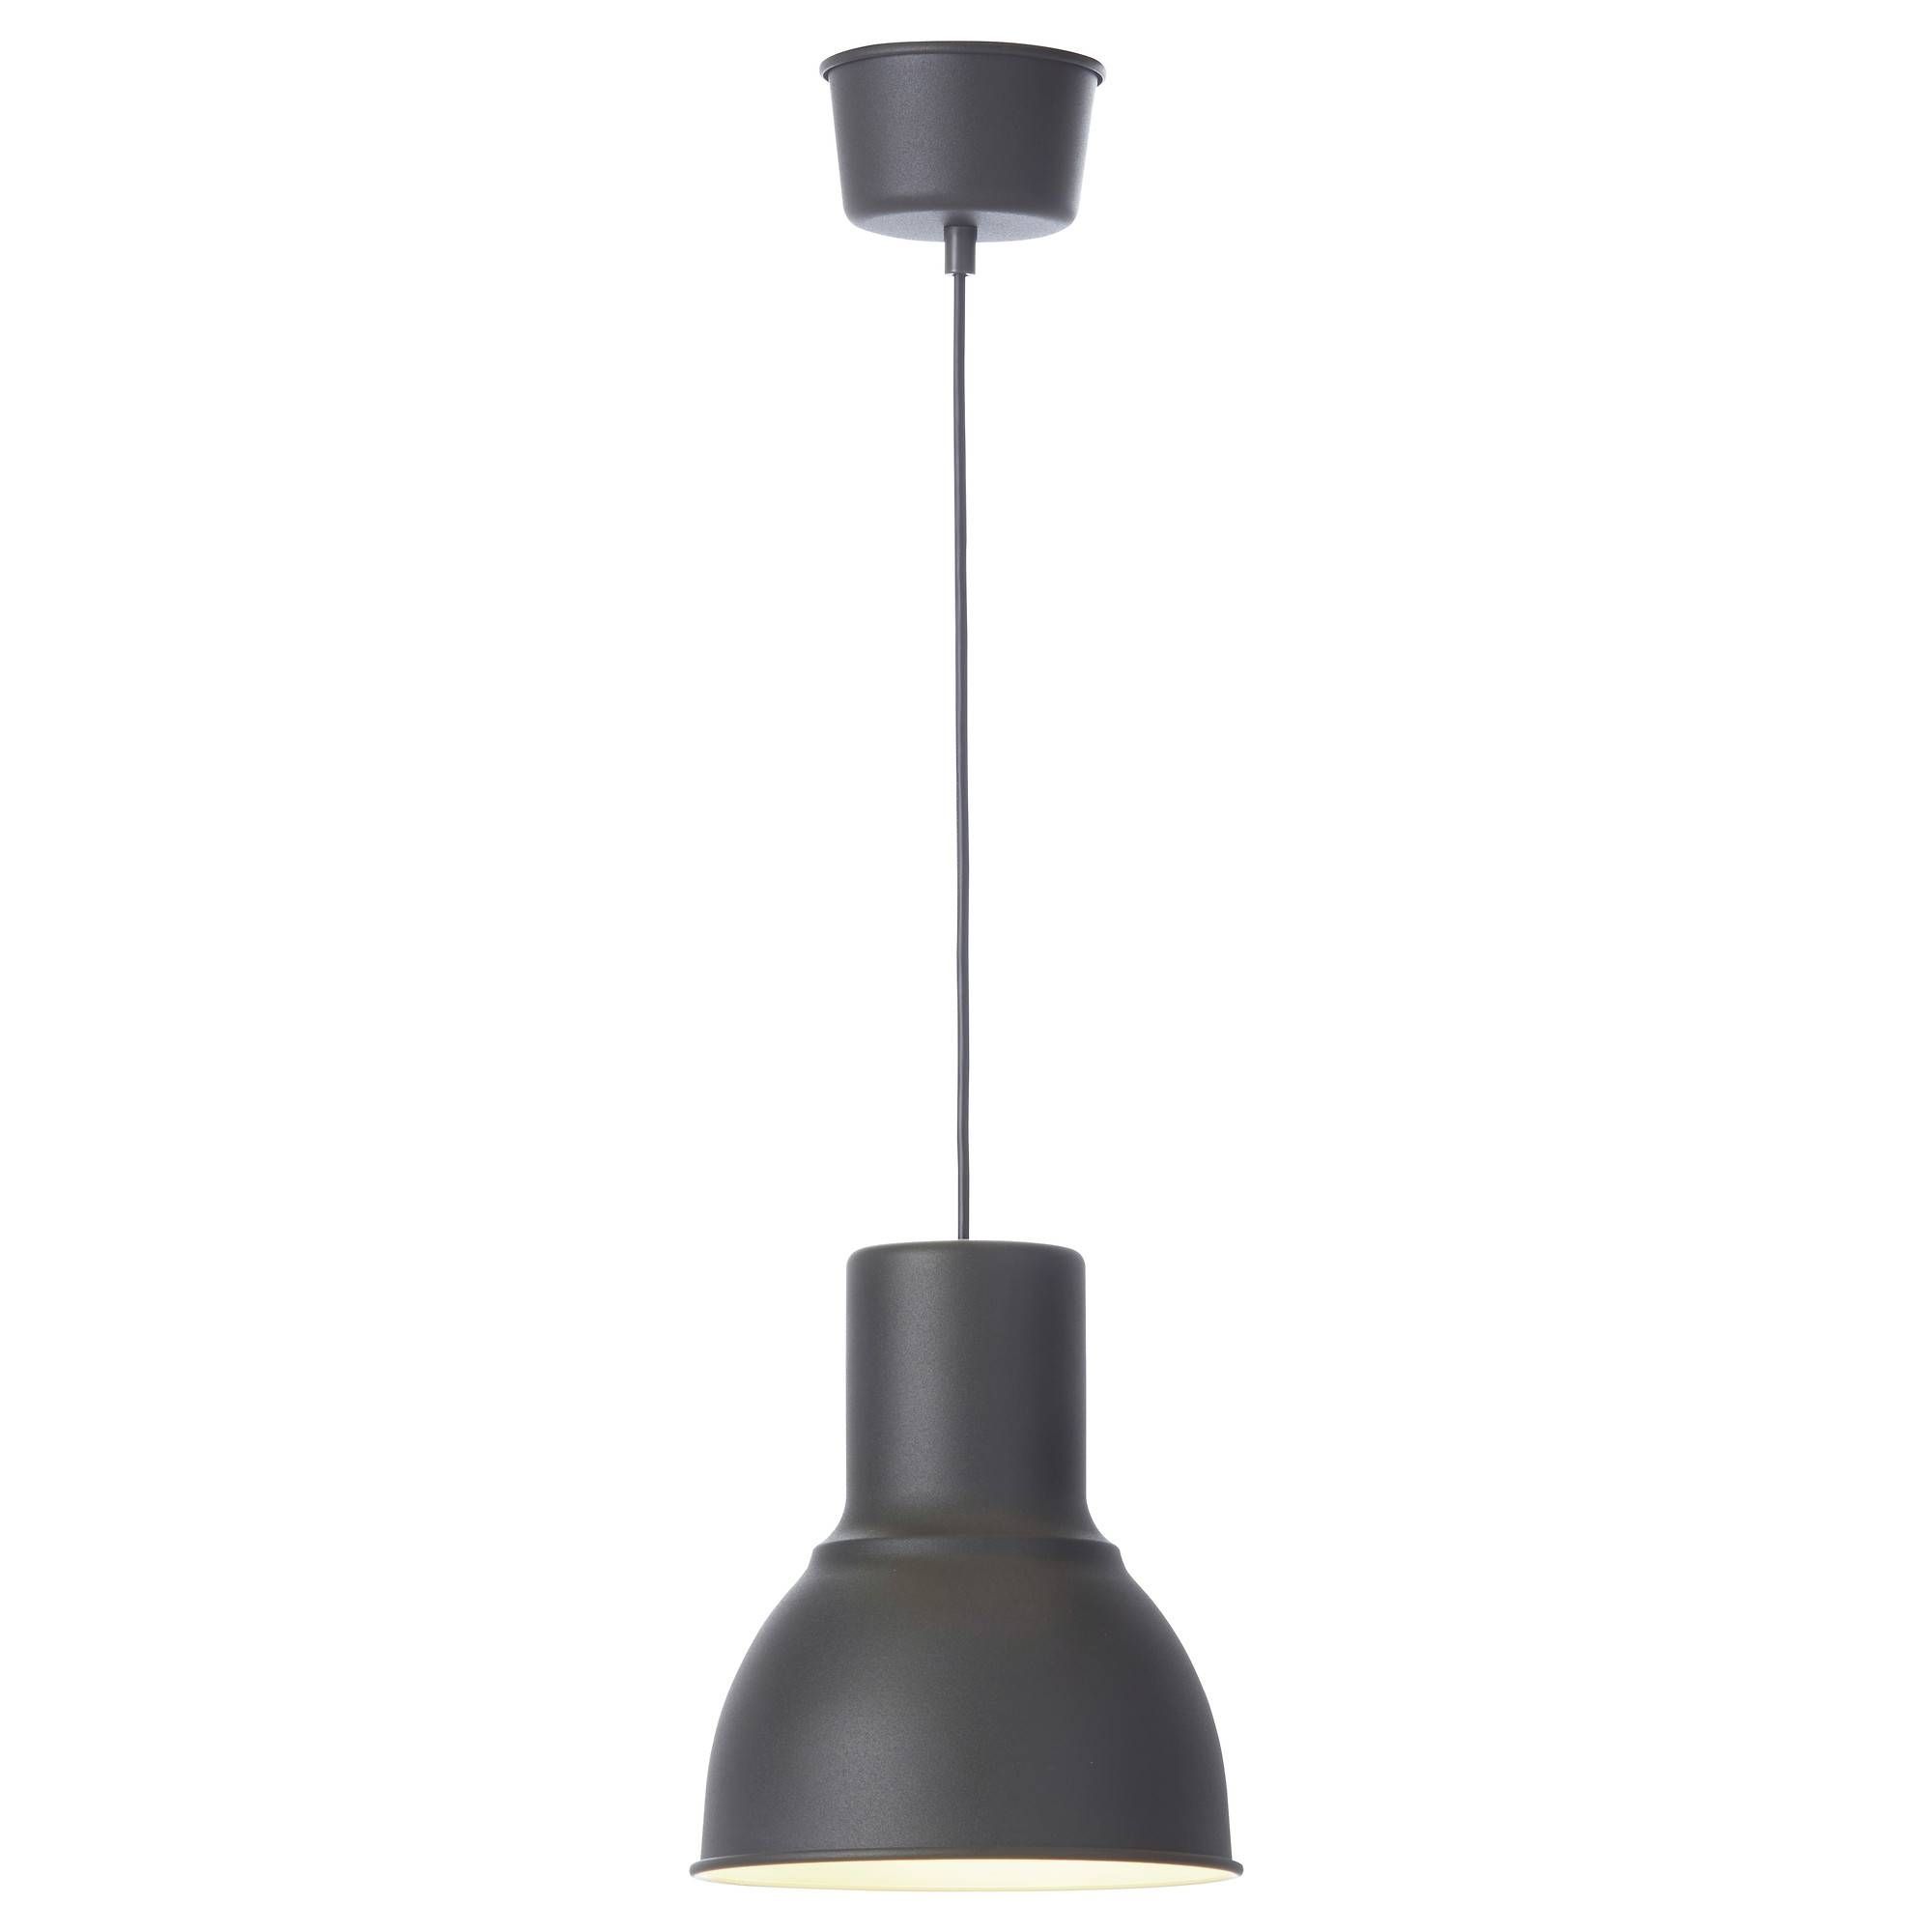 Pendant Lights & Lamp Shades – Ikea For Cheap Pendant Lights (View 12 of 15)